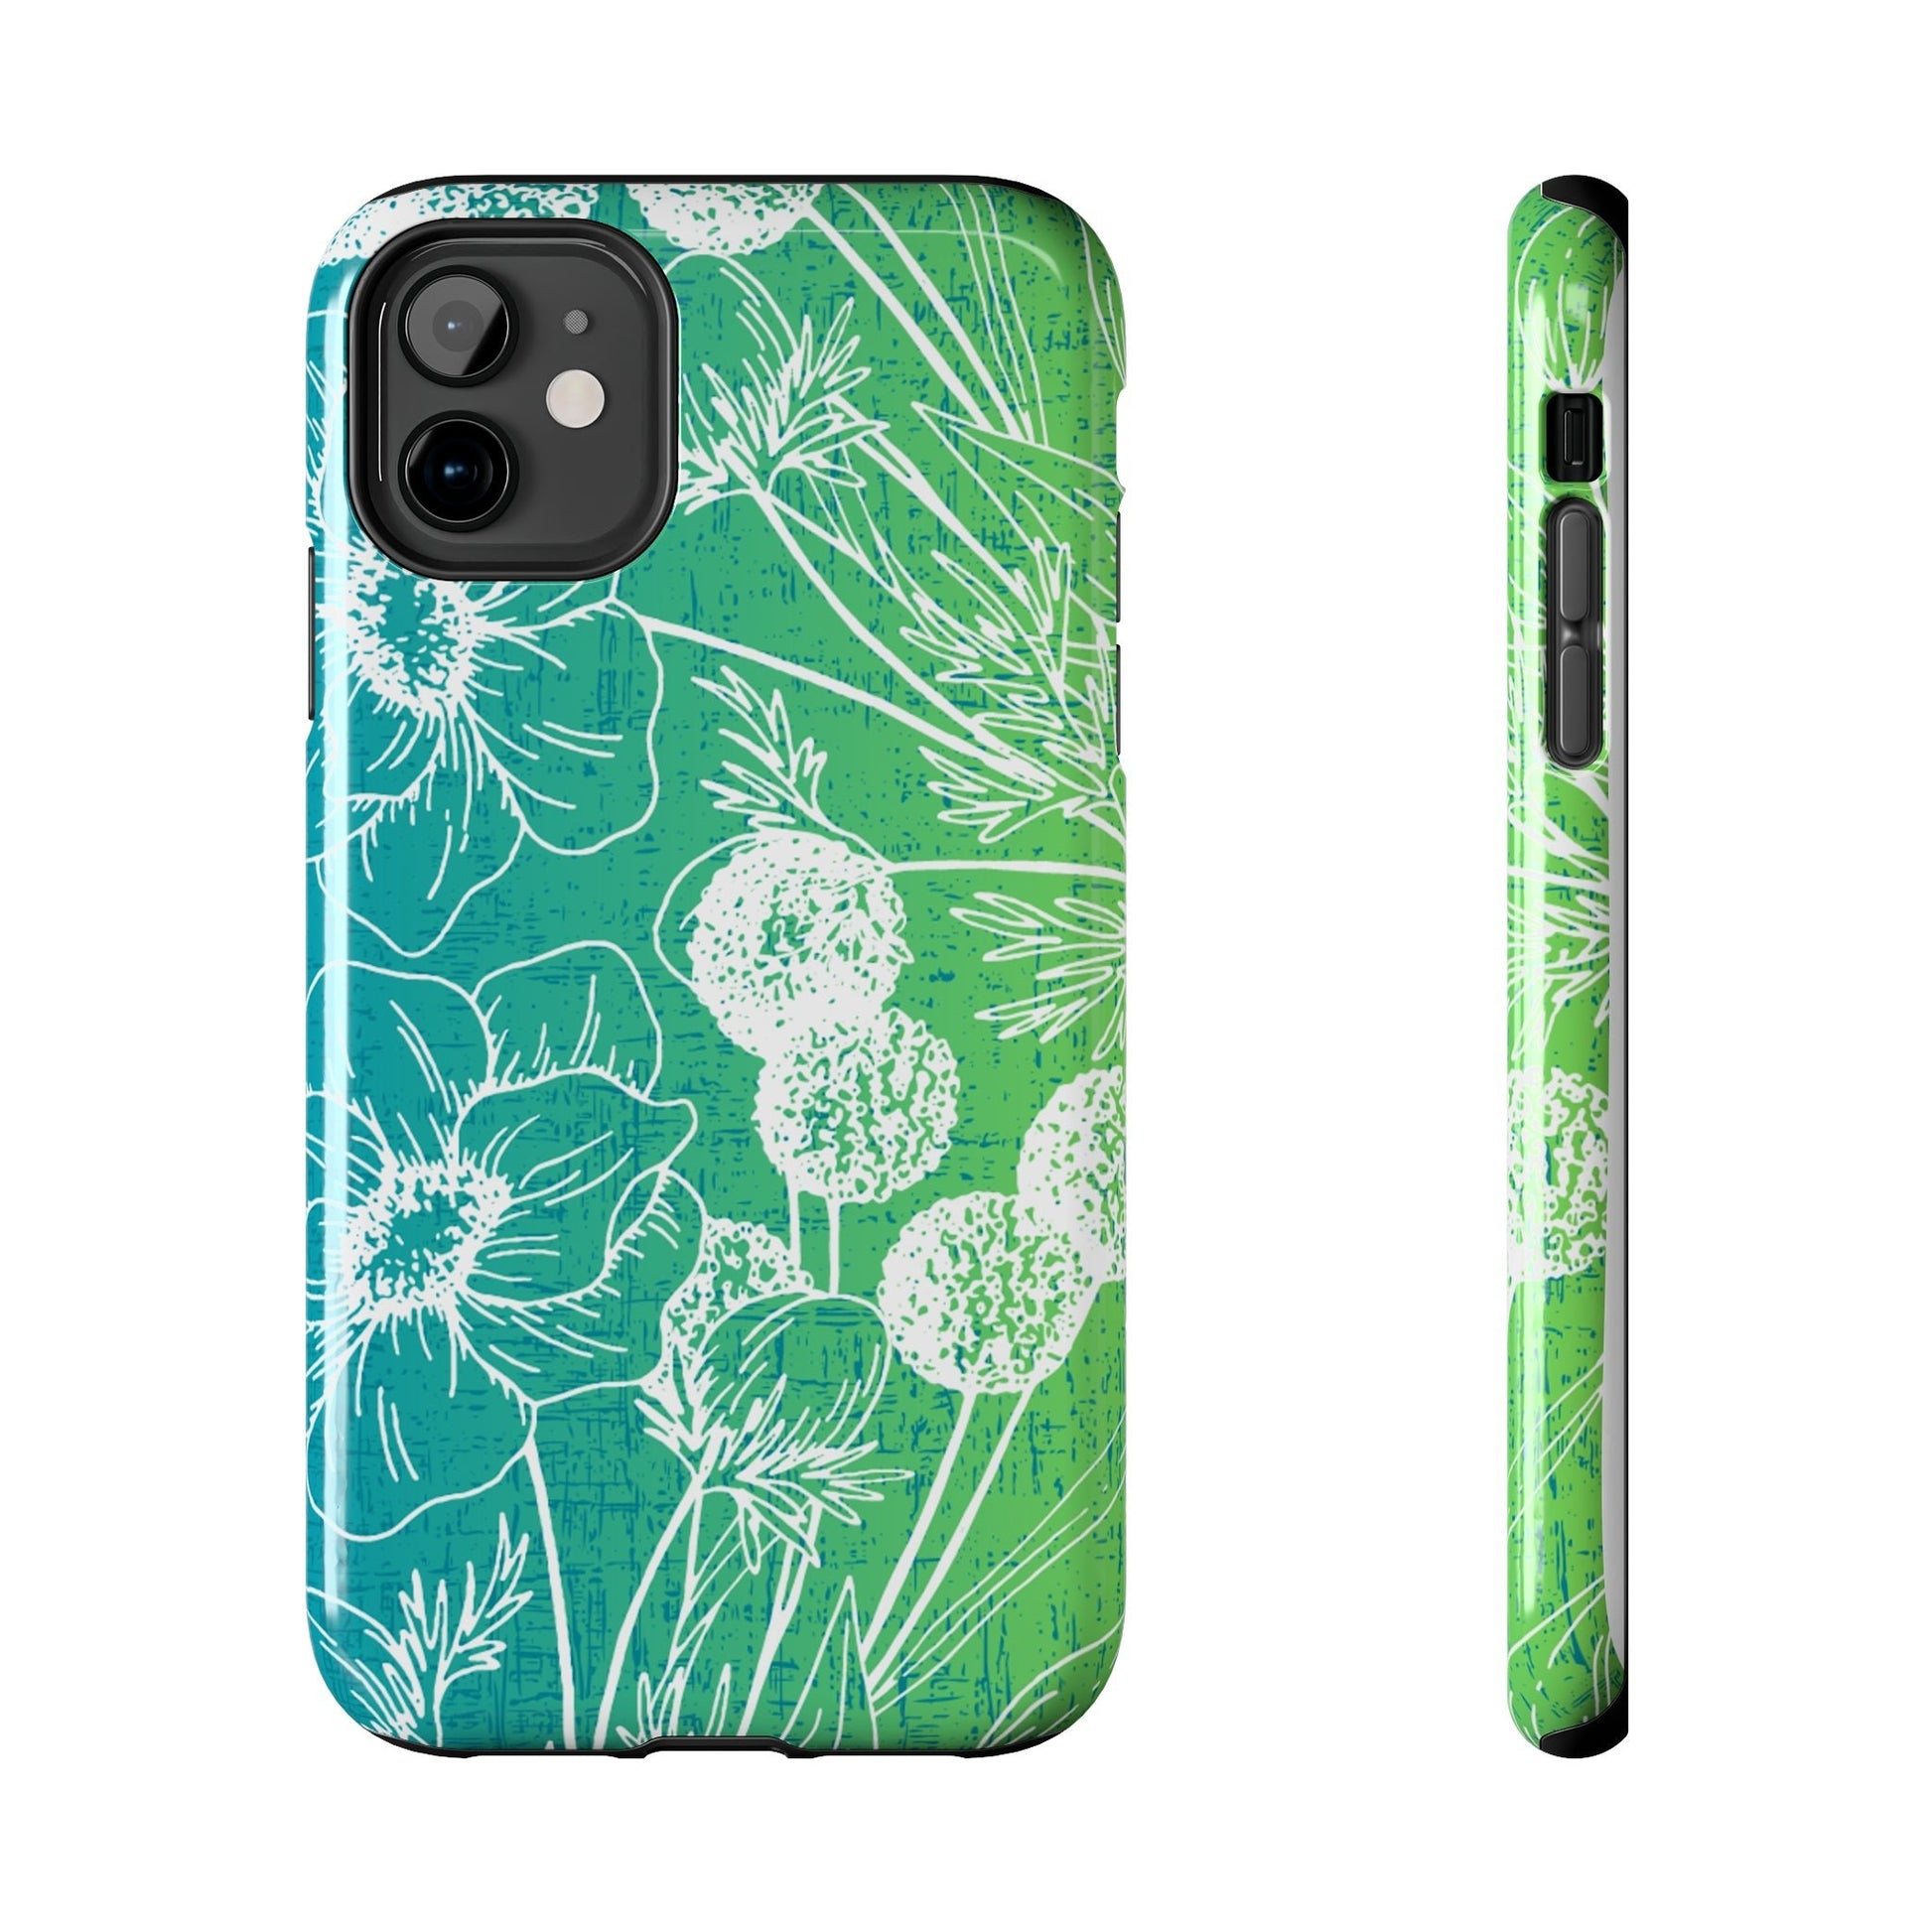 Blue and Green Ombre Floral Cell Phone Cover: Artistic Device Protection - Eddy and Rita